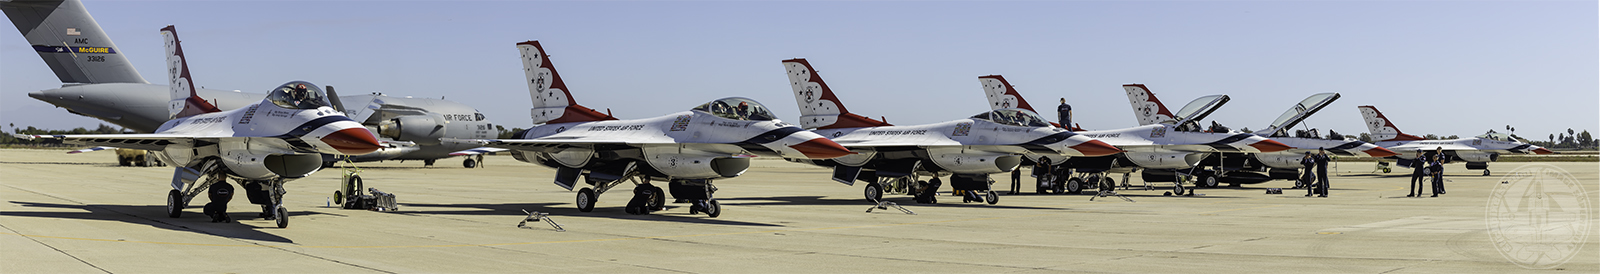 USAF Thunderbirds staged at Los Alamitos Army Air Base for the Great Pacific Air Show